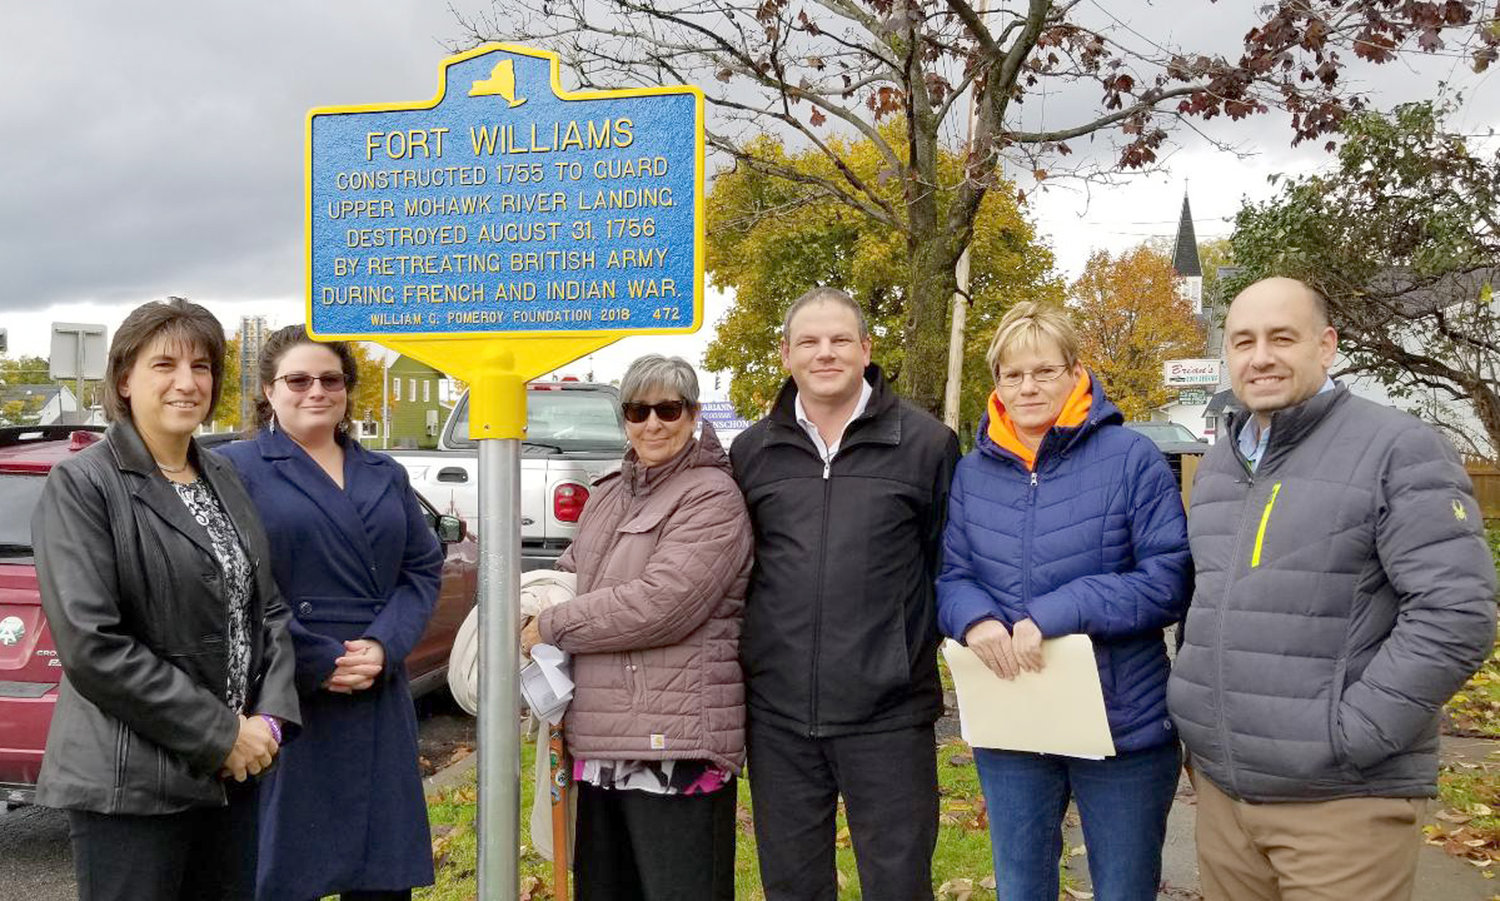 SIGN OF OLD TIMES — City officials and members of the local historical community gathered to unveil a pair of historical markers on East Whitesboro Street in Rome earlier this week.  The markers, which pay homage to a pair of colonial forts, Fort Williams and Fort Craven, both destroyed during the French and Indian War. On hand to celebrate the event were, from left: Mayor Jacqueline M. Izzo, Cabryn Gurdo, chair of the Historic Preservation Advisory Committee of Rome; Bobbie O’Brien, Rome Historical Society trustee and HPAC member; Arthur L. Simmons III, Rome Historical Society executive director; Patricia Grucza, HPAC member; and Ric Dursi, 6th Ward councilor.